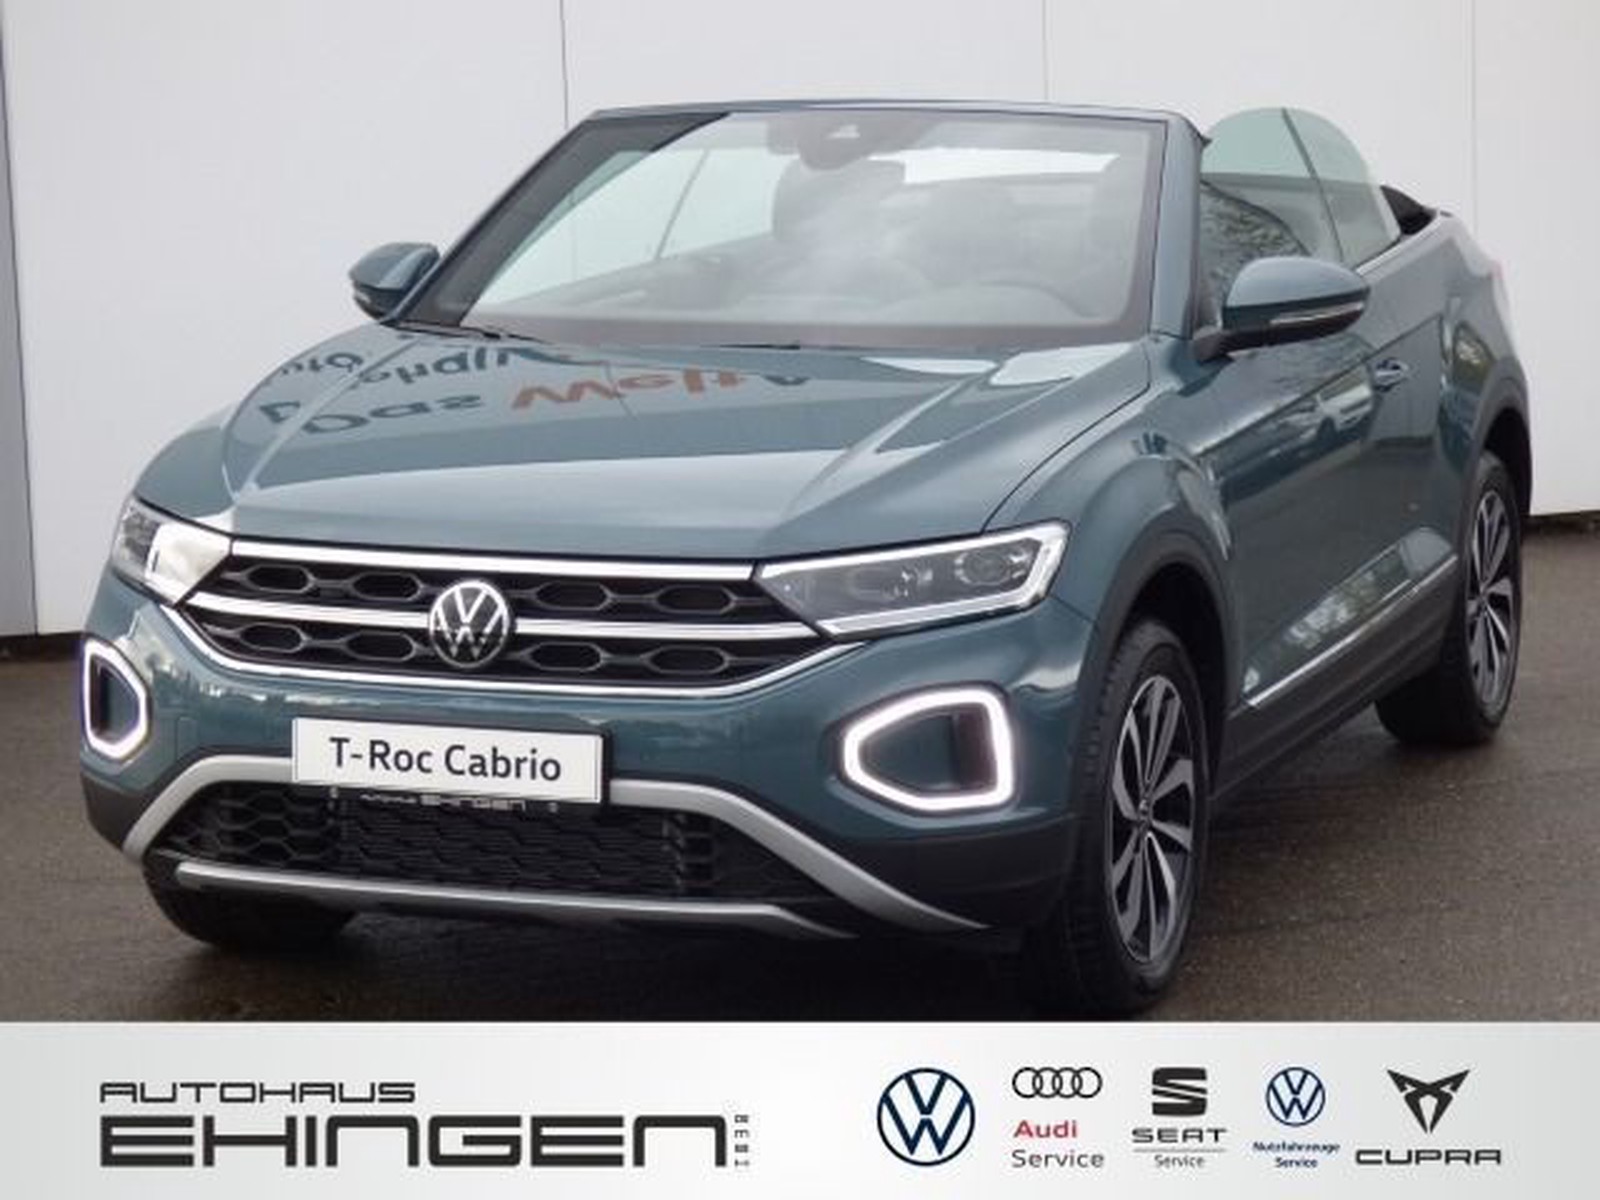 Volkswagen T-Roc Cabriolet Style 1.0 l TSI OPF 81 kW (110 PS) 6